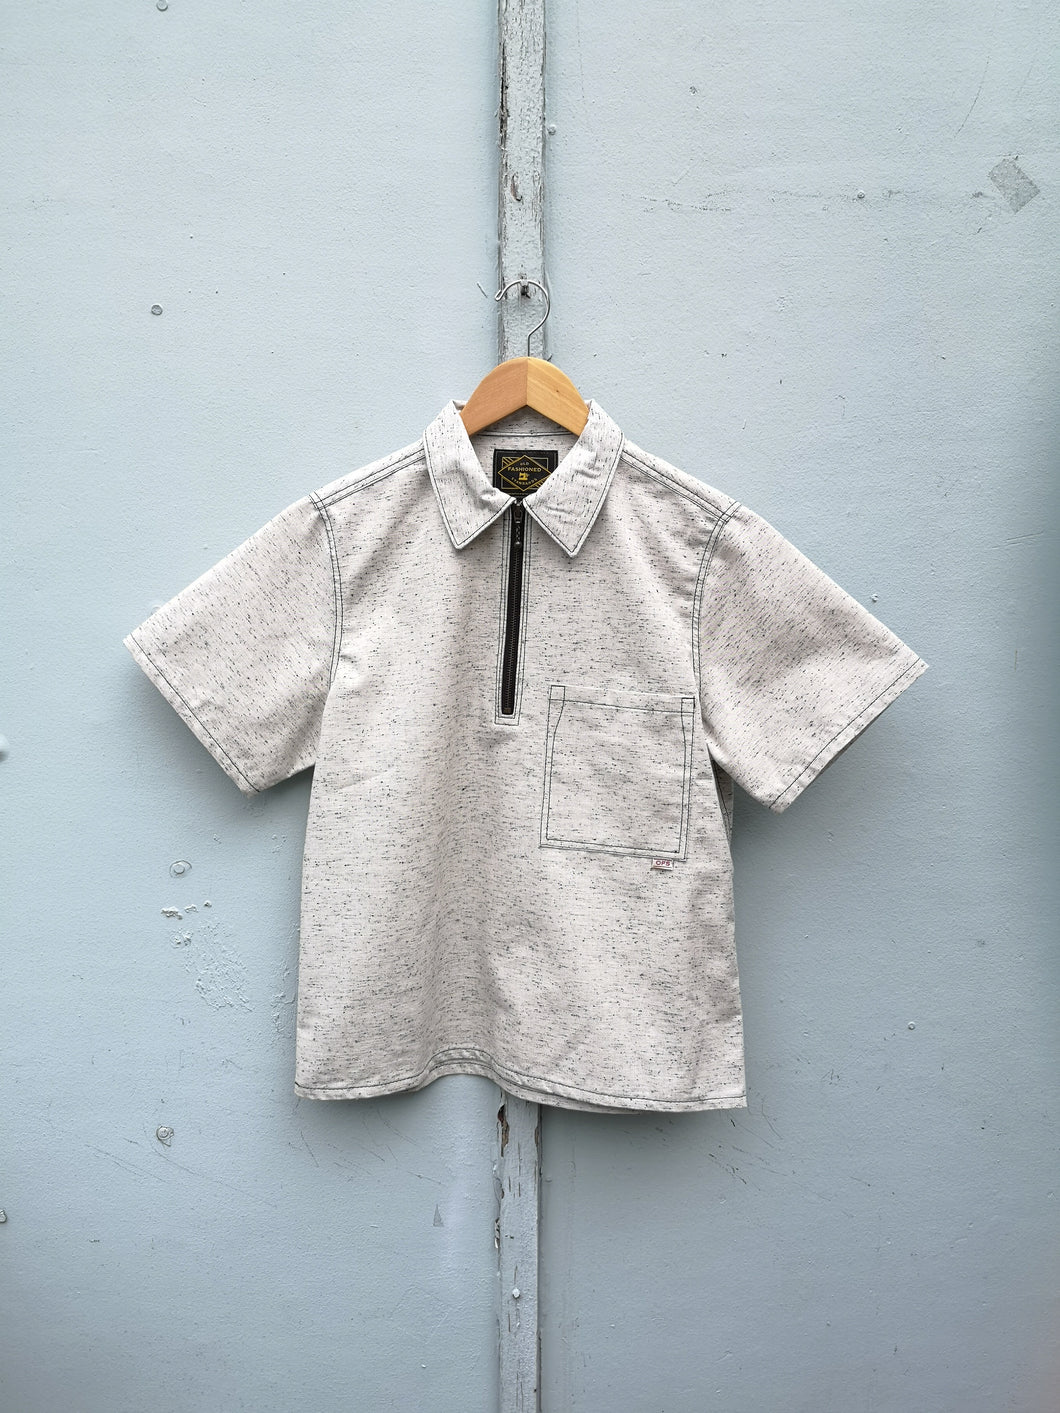 Old Fashioned Standards - Summer Nights Shirt in Cookies 'n Cream - front